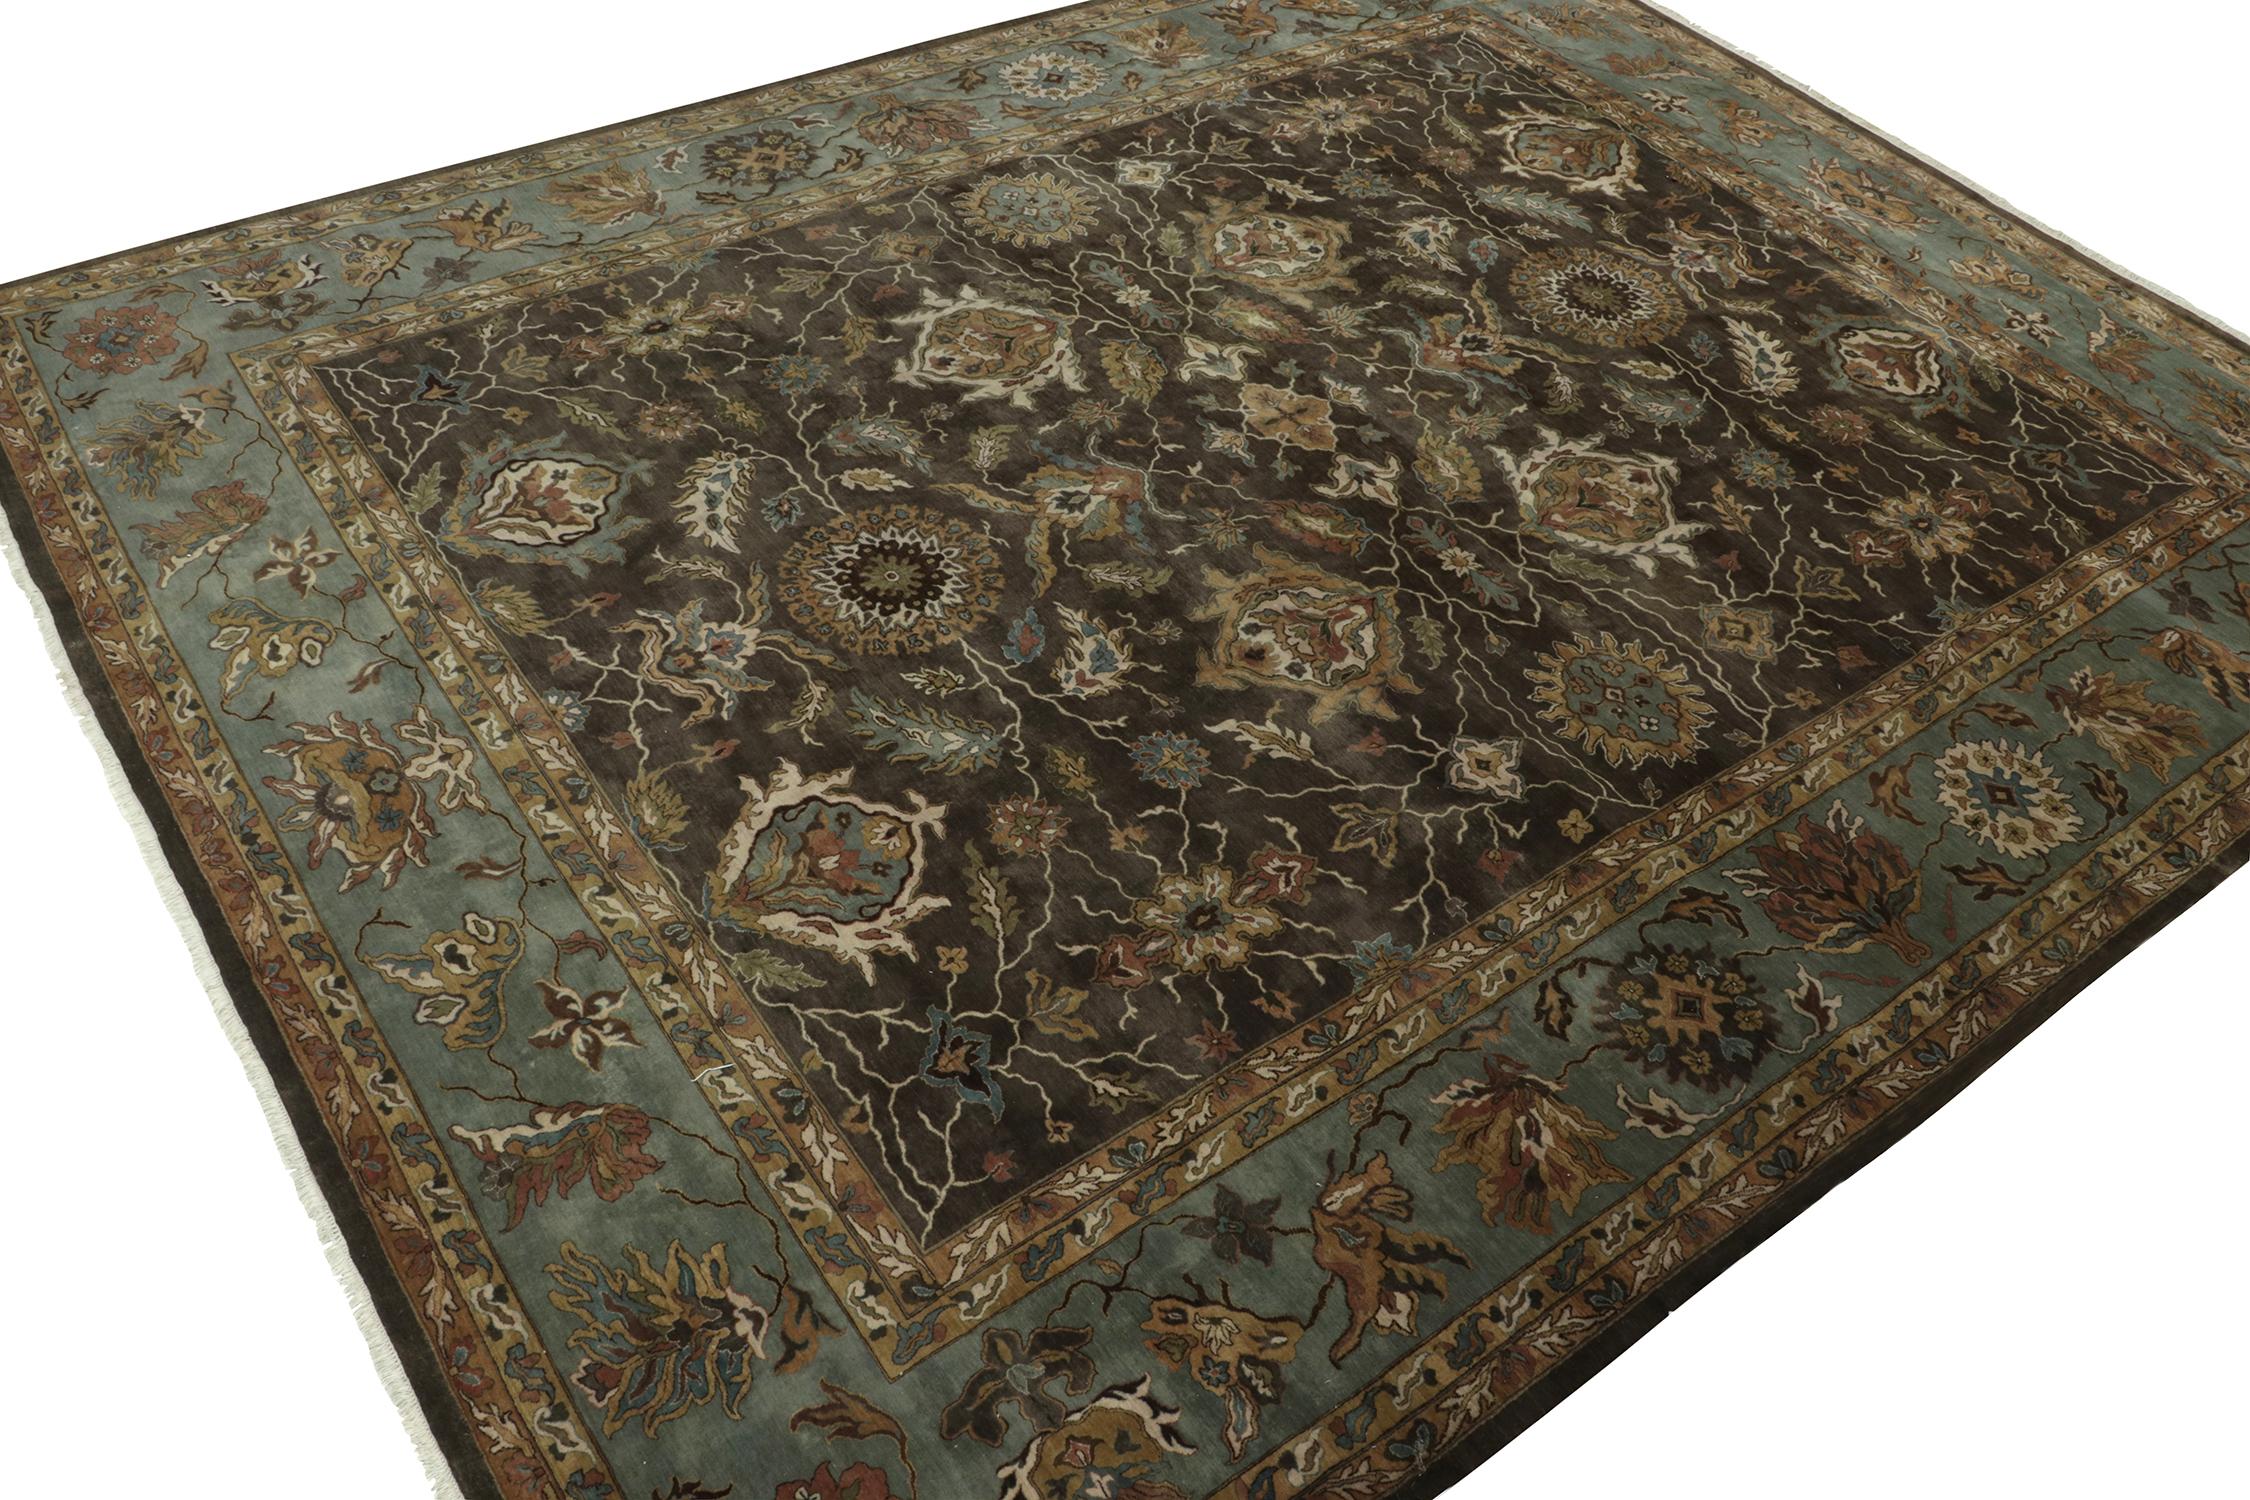 A 13x16 rug inspired from celebrated Tabriz rug styles, from Rug & Kilim’s Modern Classics Collection. Hand knotted in wool, playing an exceptional blue and green beside gold and beige-brown floral patterns with classic grace.
Further On the